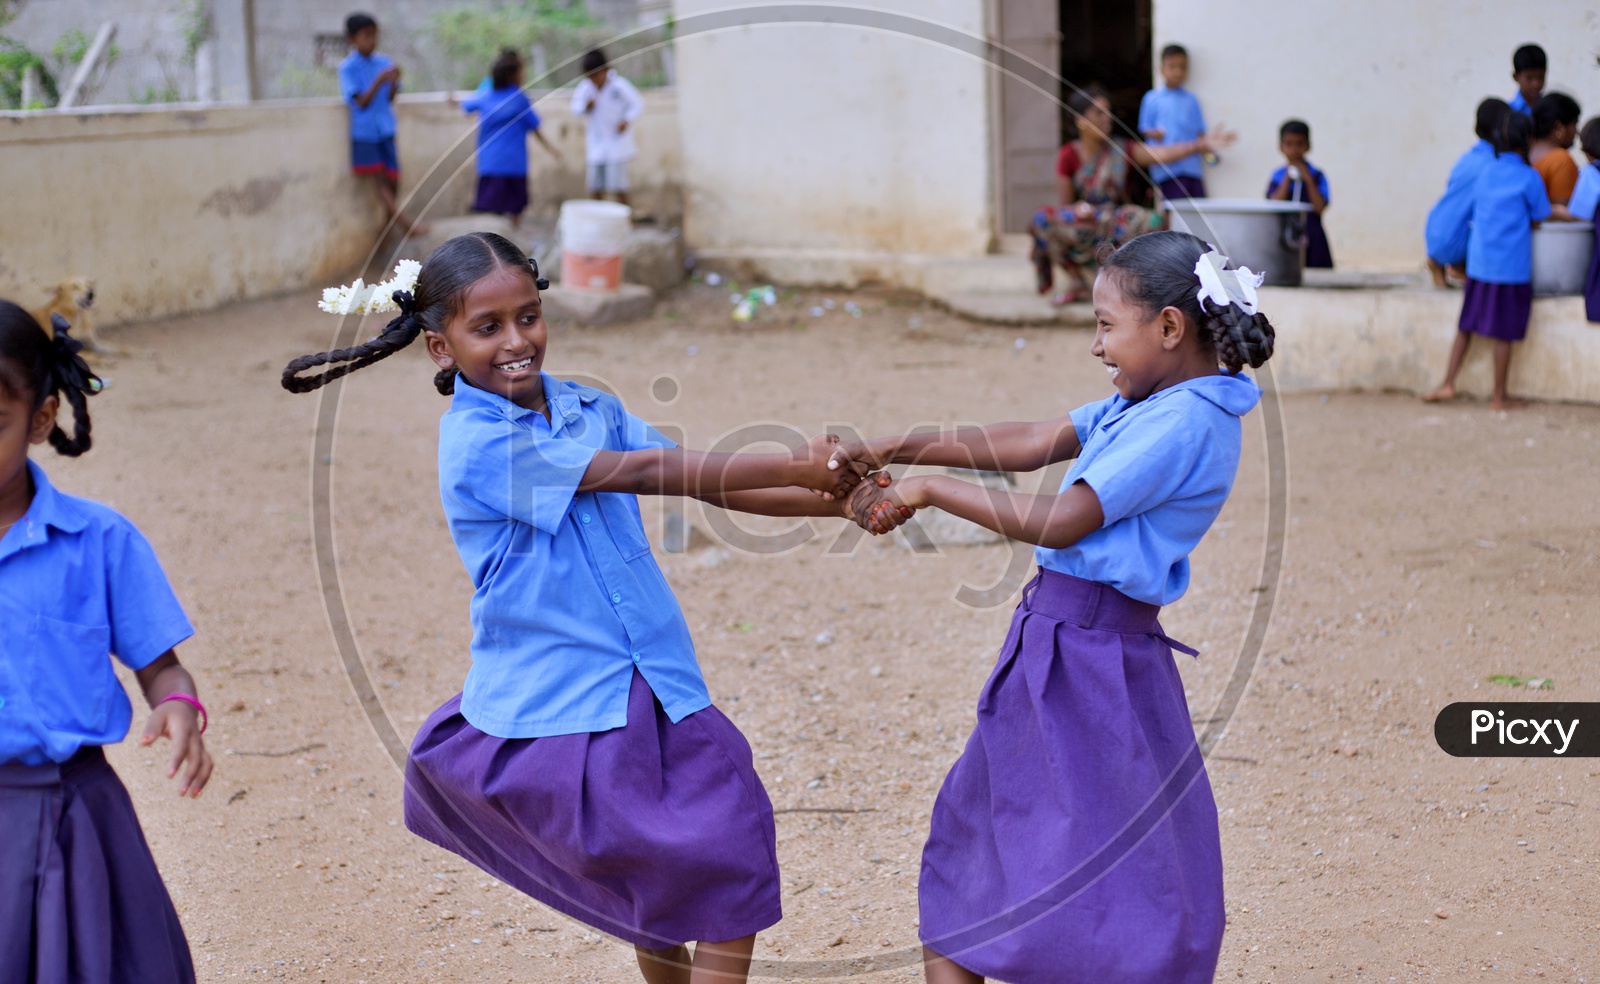 Girl students playing in playground.